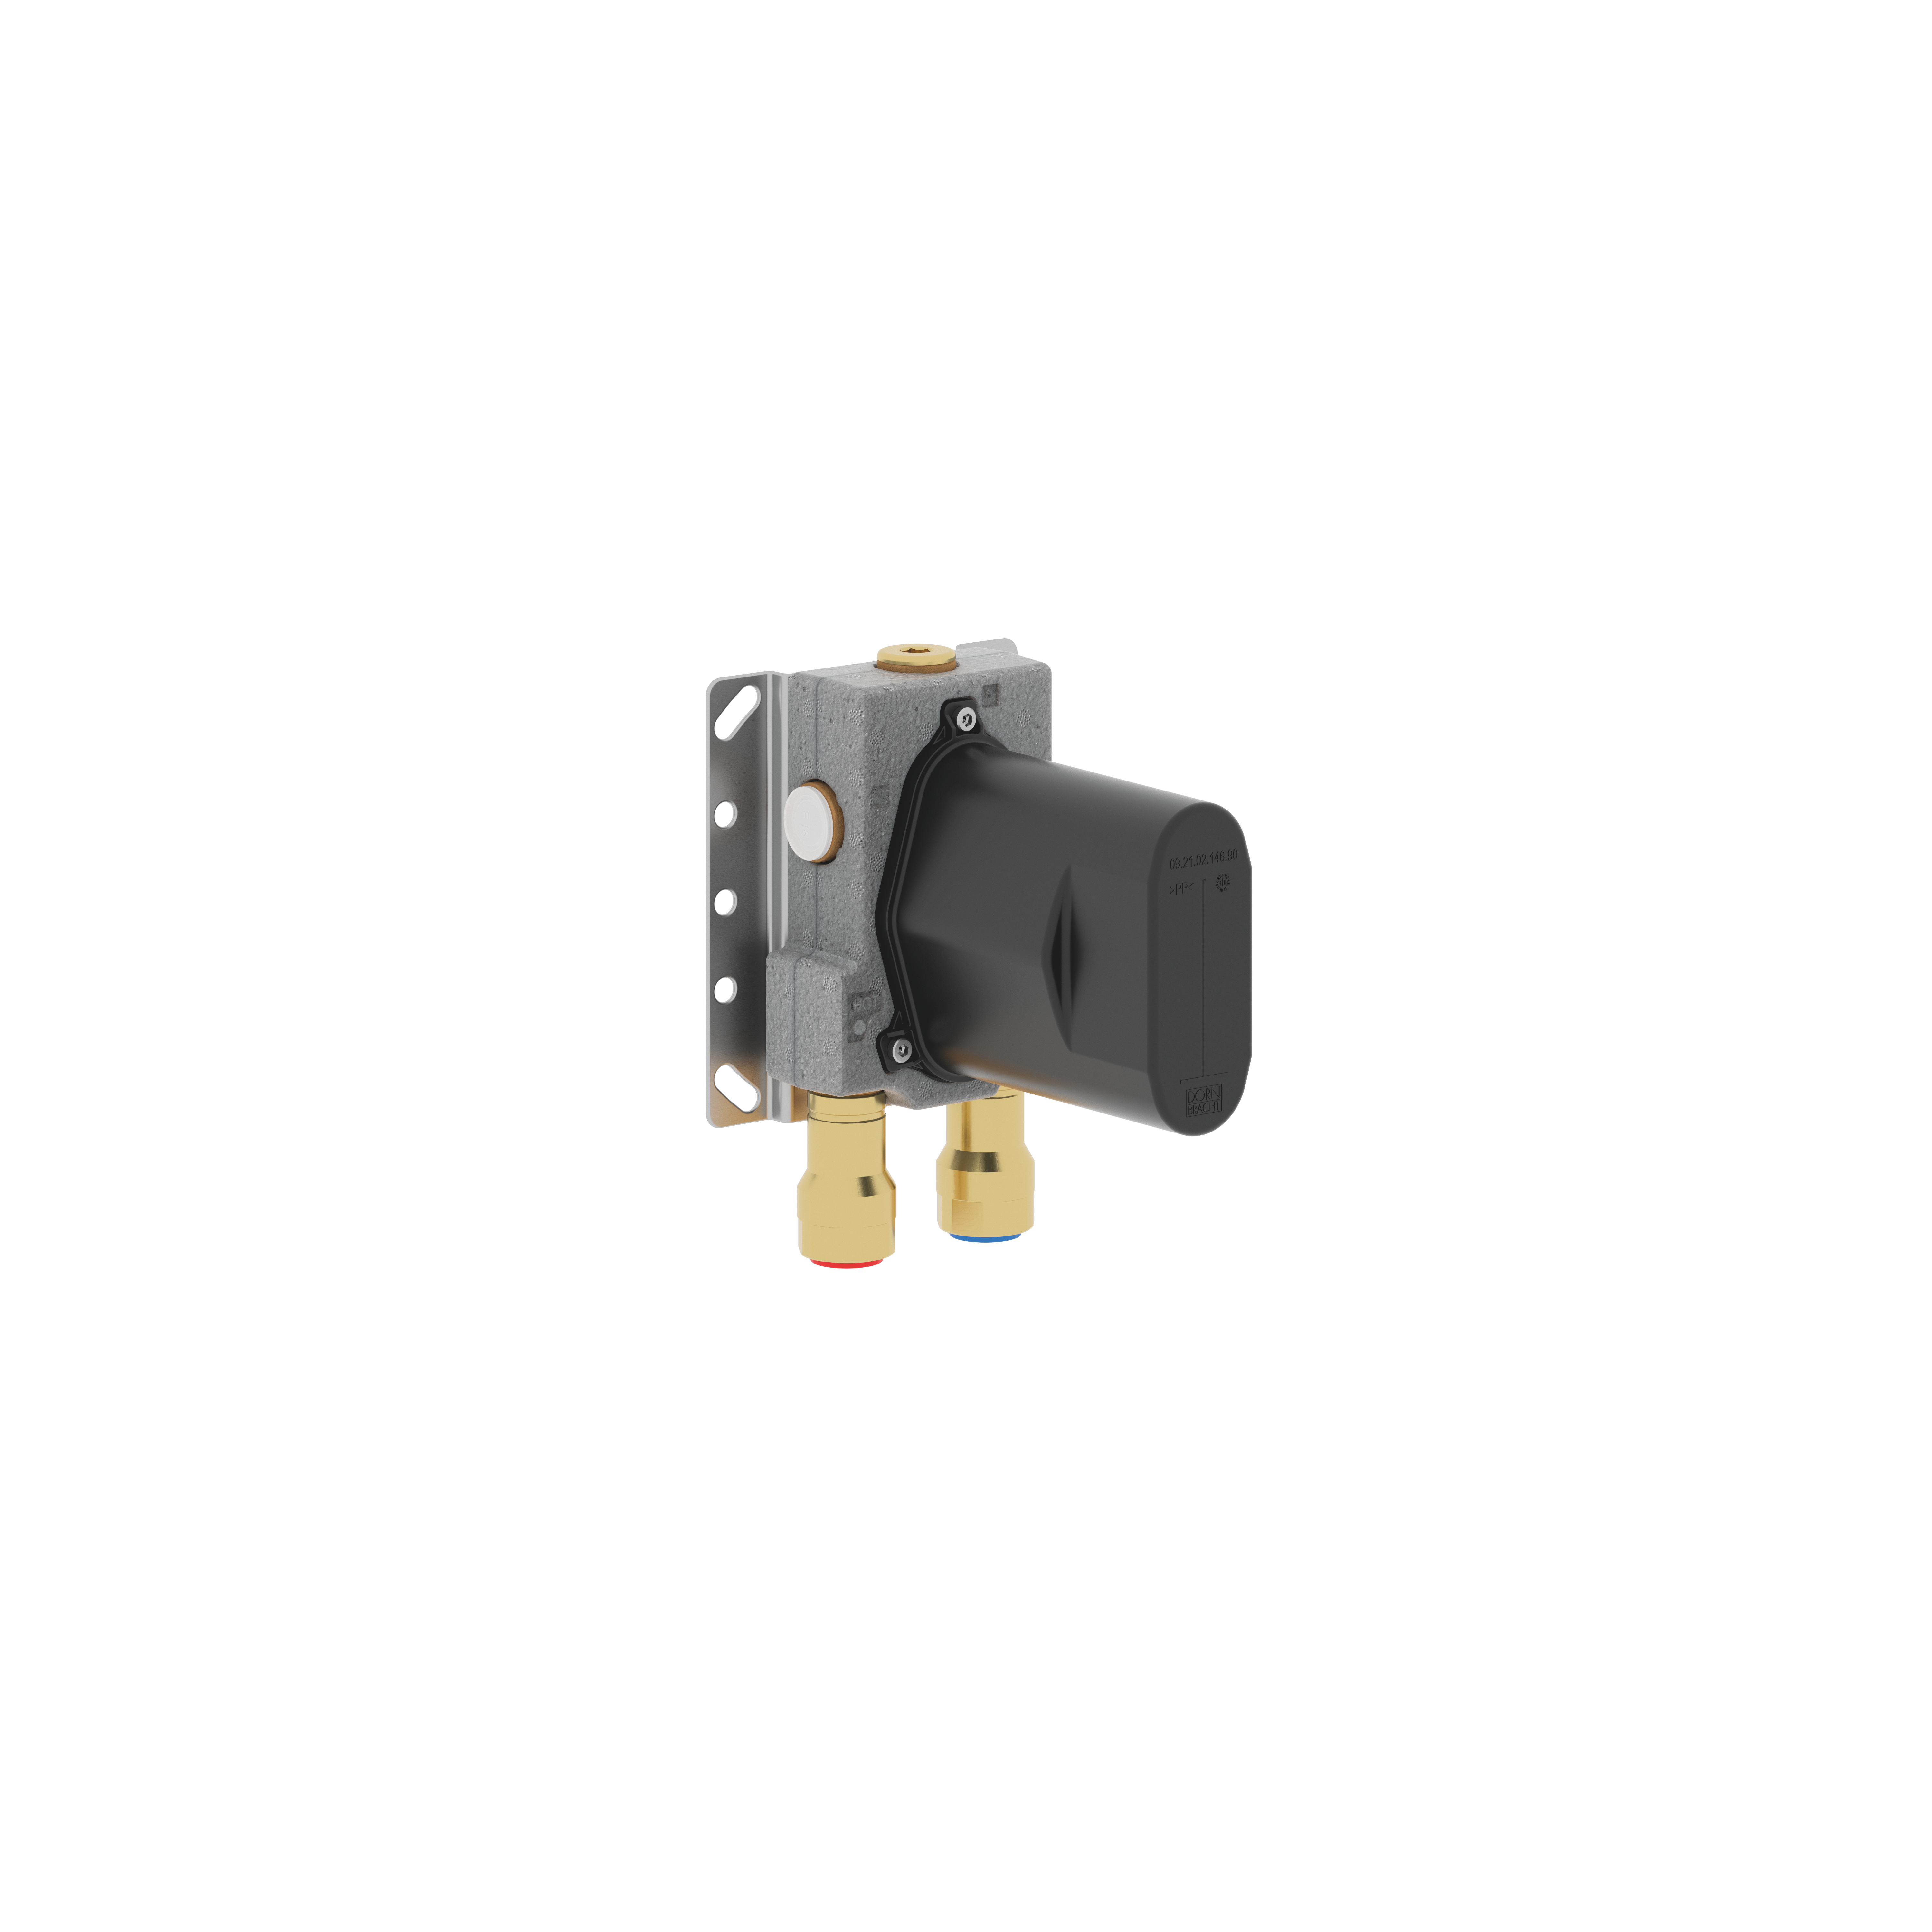 SERIES-VARIOUS Concealed rough parts: Concealed thermostat